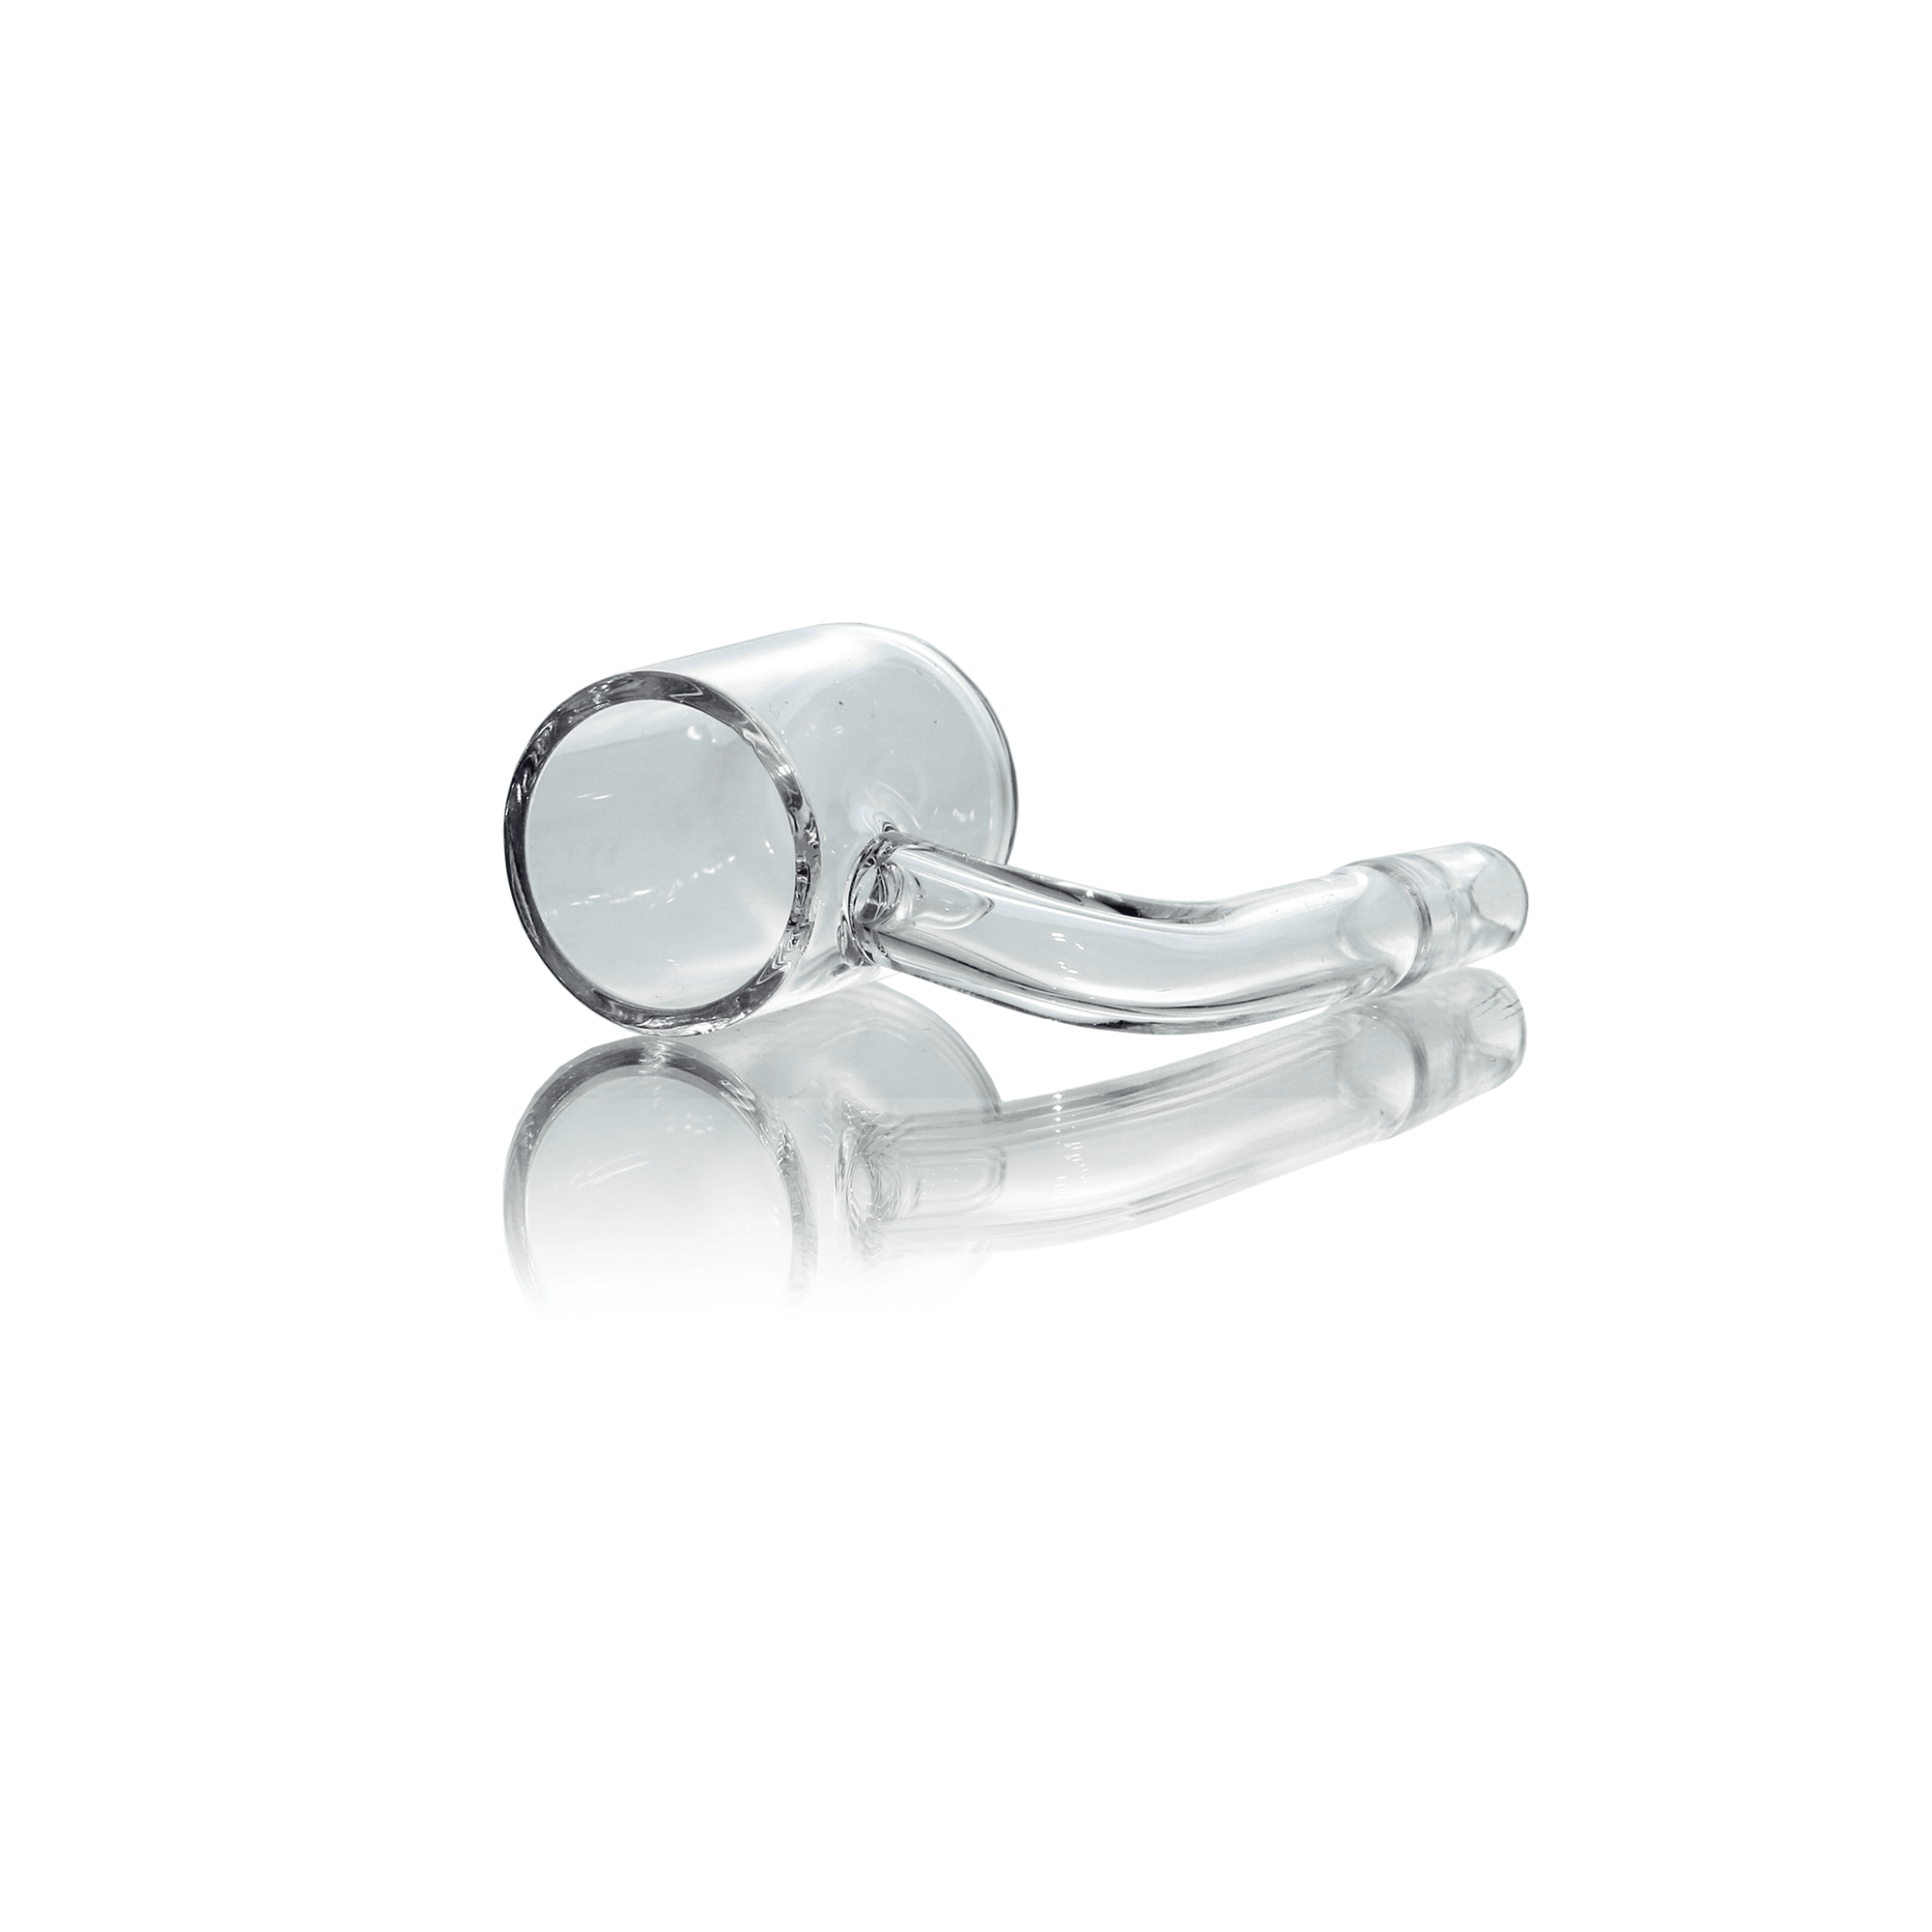 Flat Top Quartz Banger 10mm Male With Cup Insert and Saucer Cap | Angled Banger View | TDS